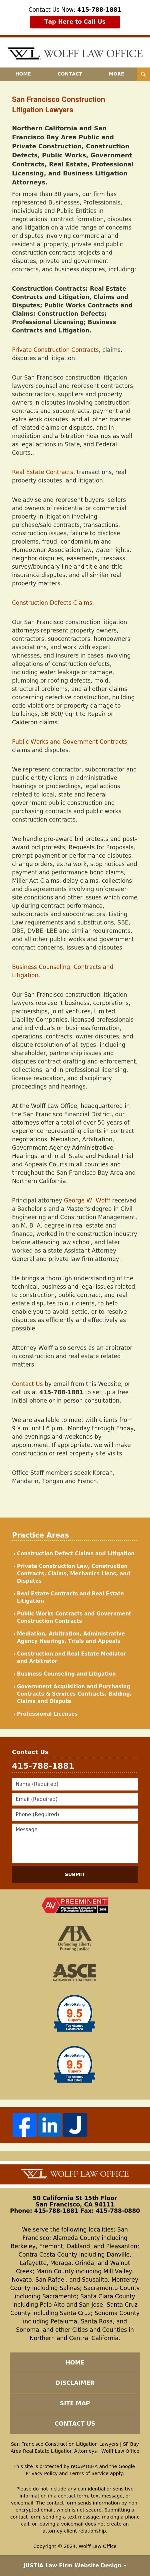 Law Office of George William Wolff & Associates - San Francisco CA Lawyers